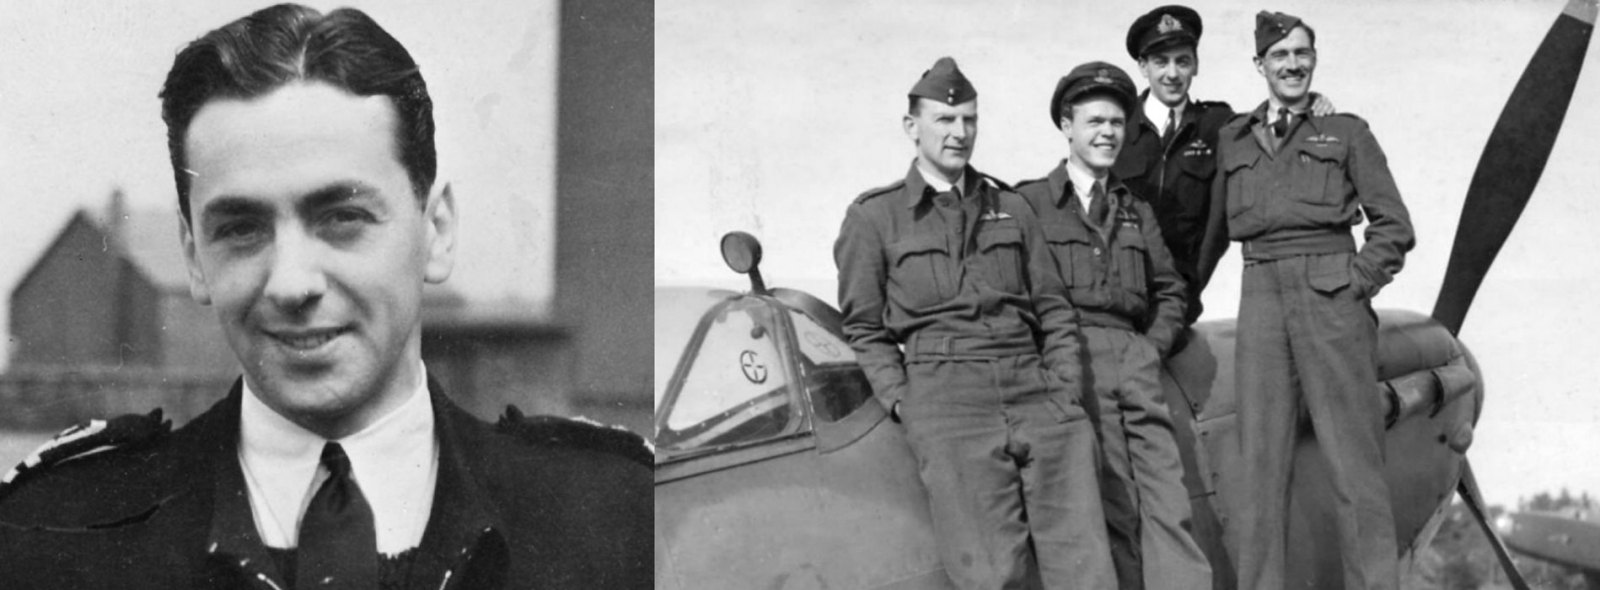 Eric Winkle Brown as a naval lieutenant and with RAF test pilot colleagues